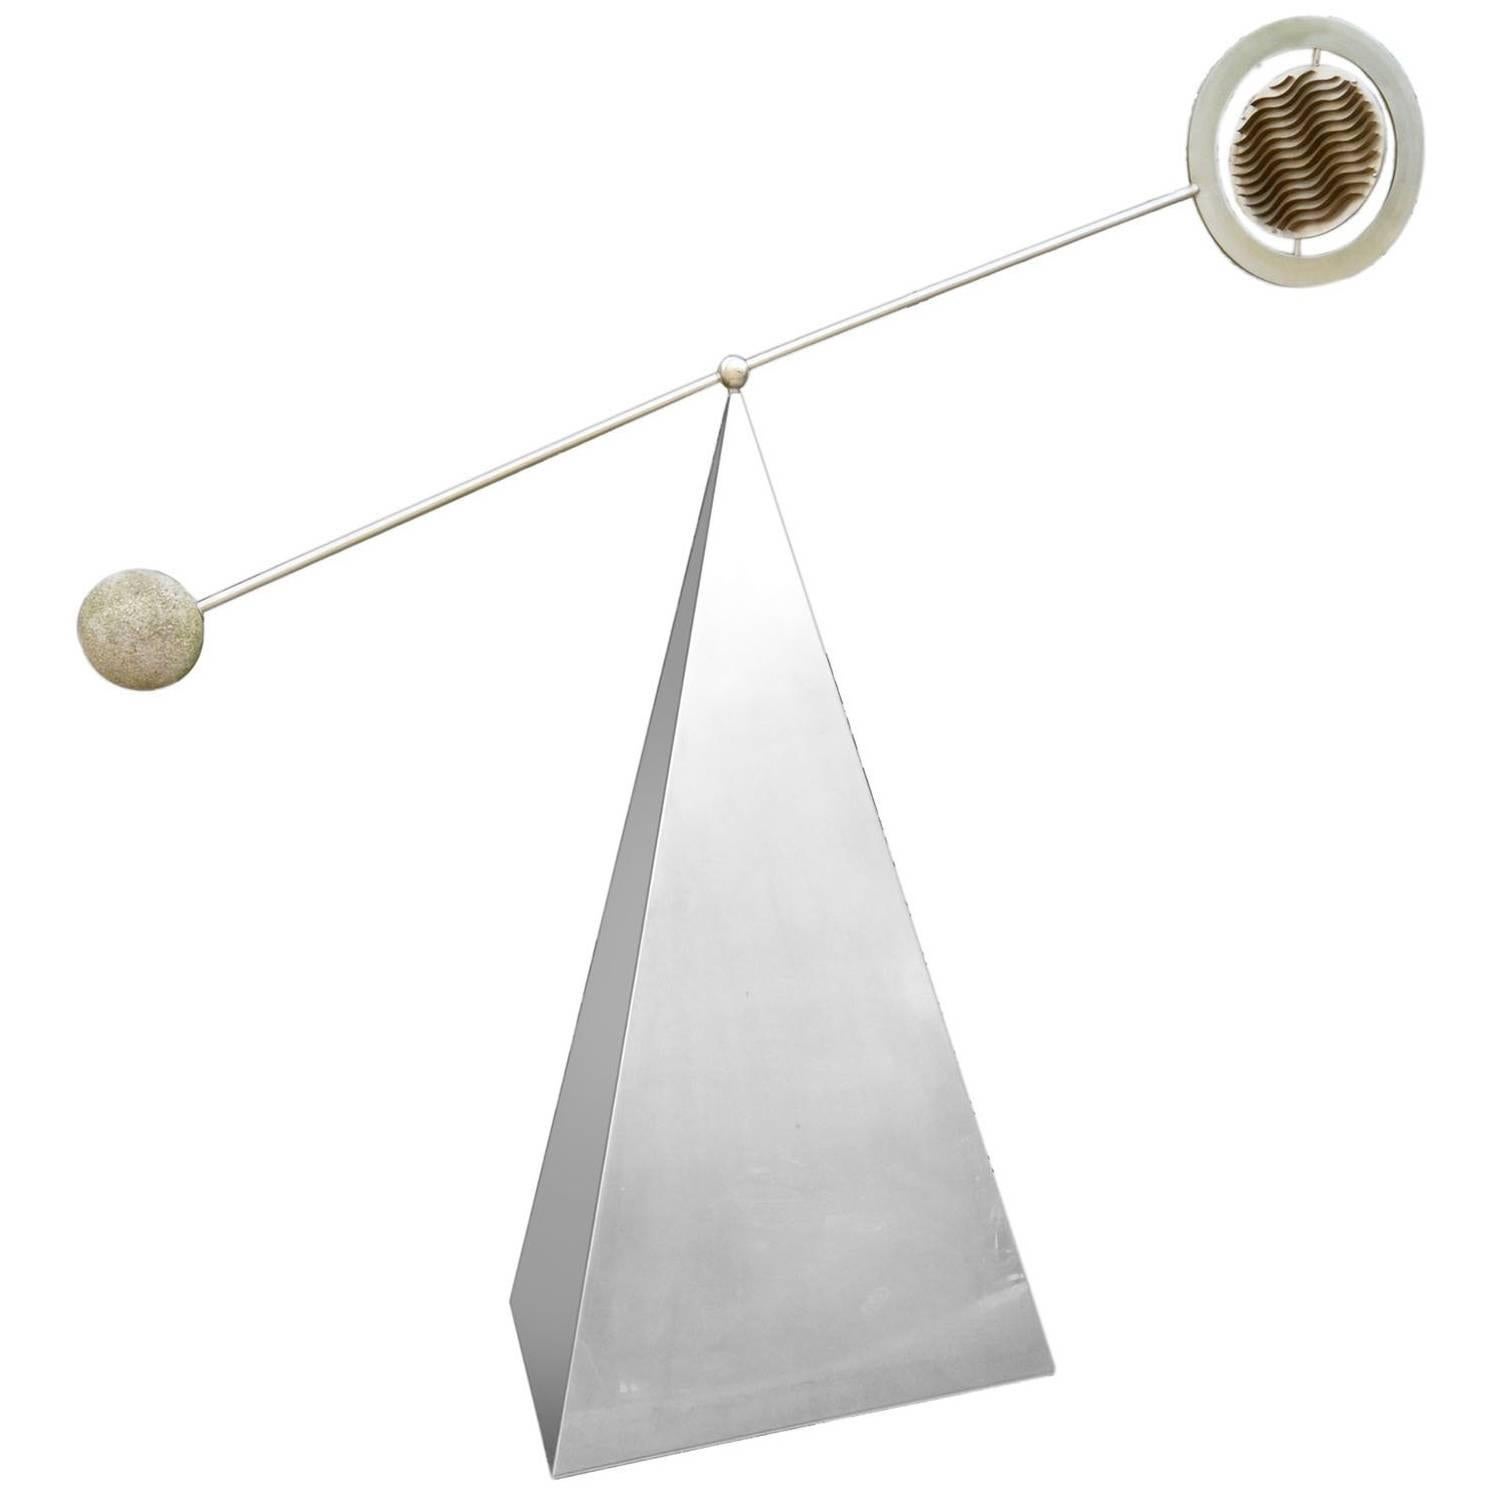 Marc Cavell, Stabile in Metal and Granite, Unique Piece, circa 1970 For Sale